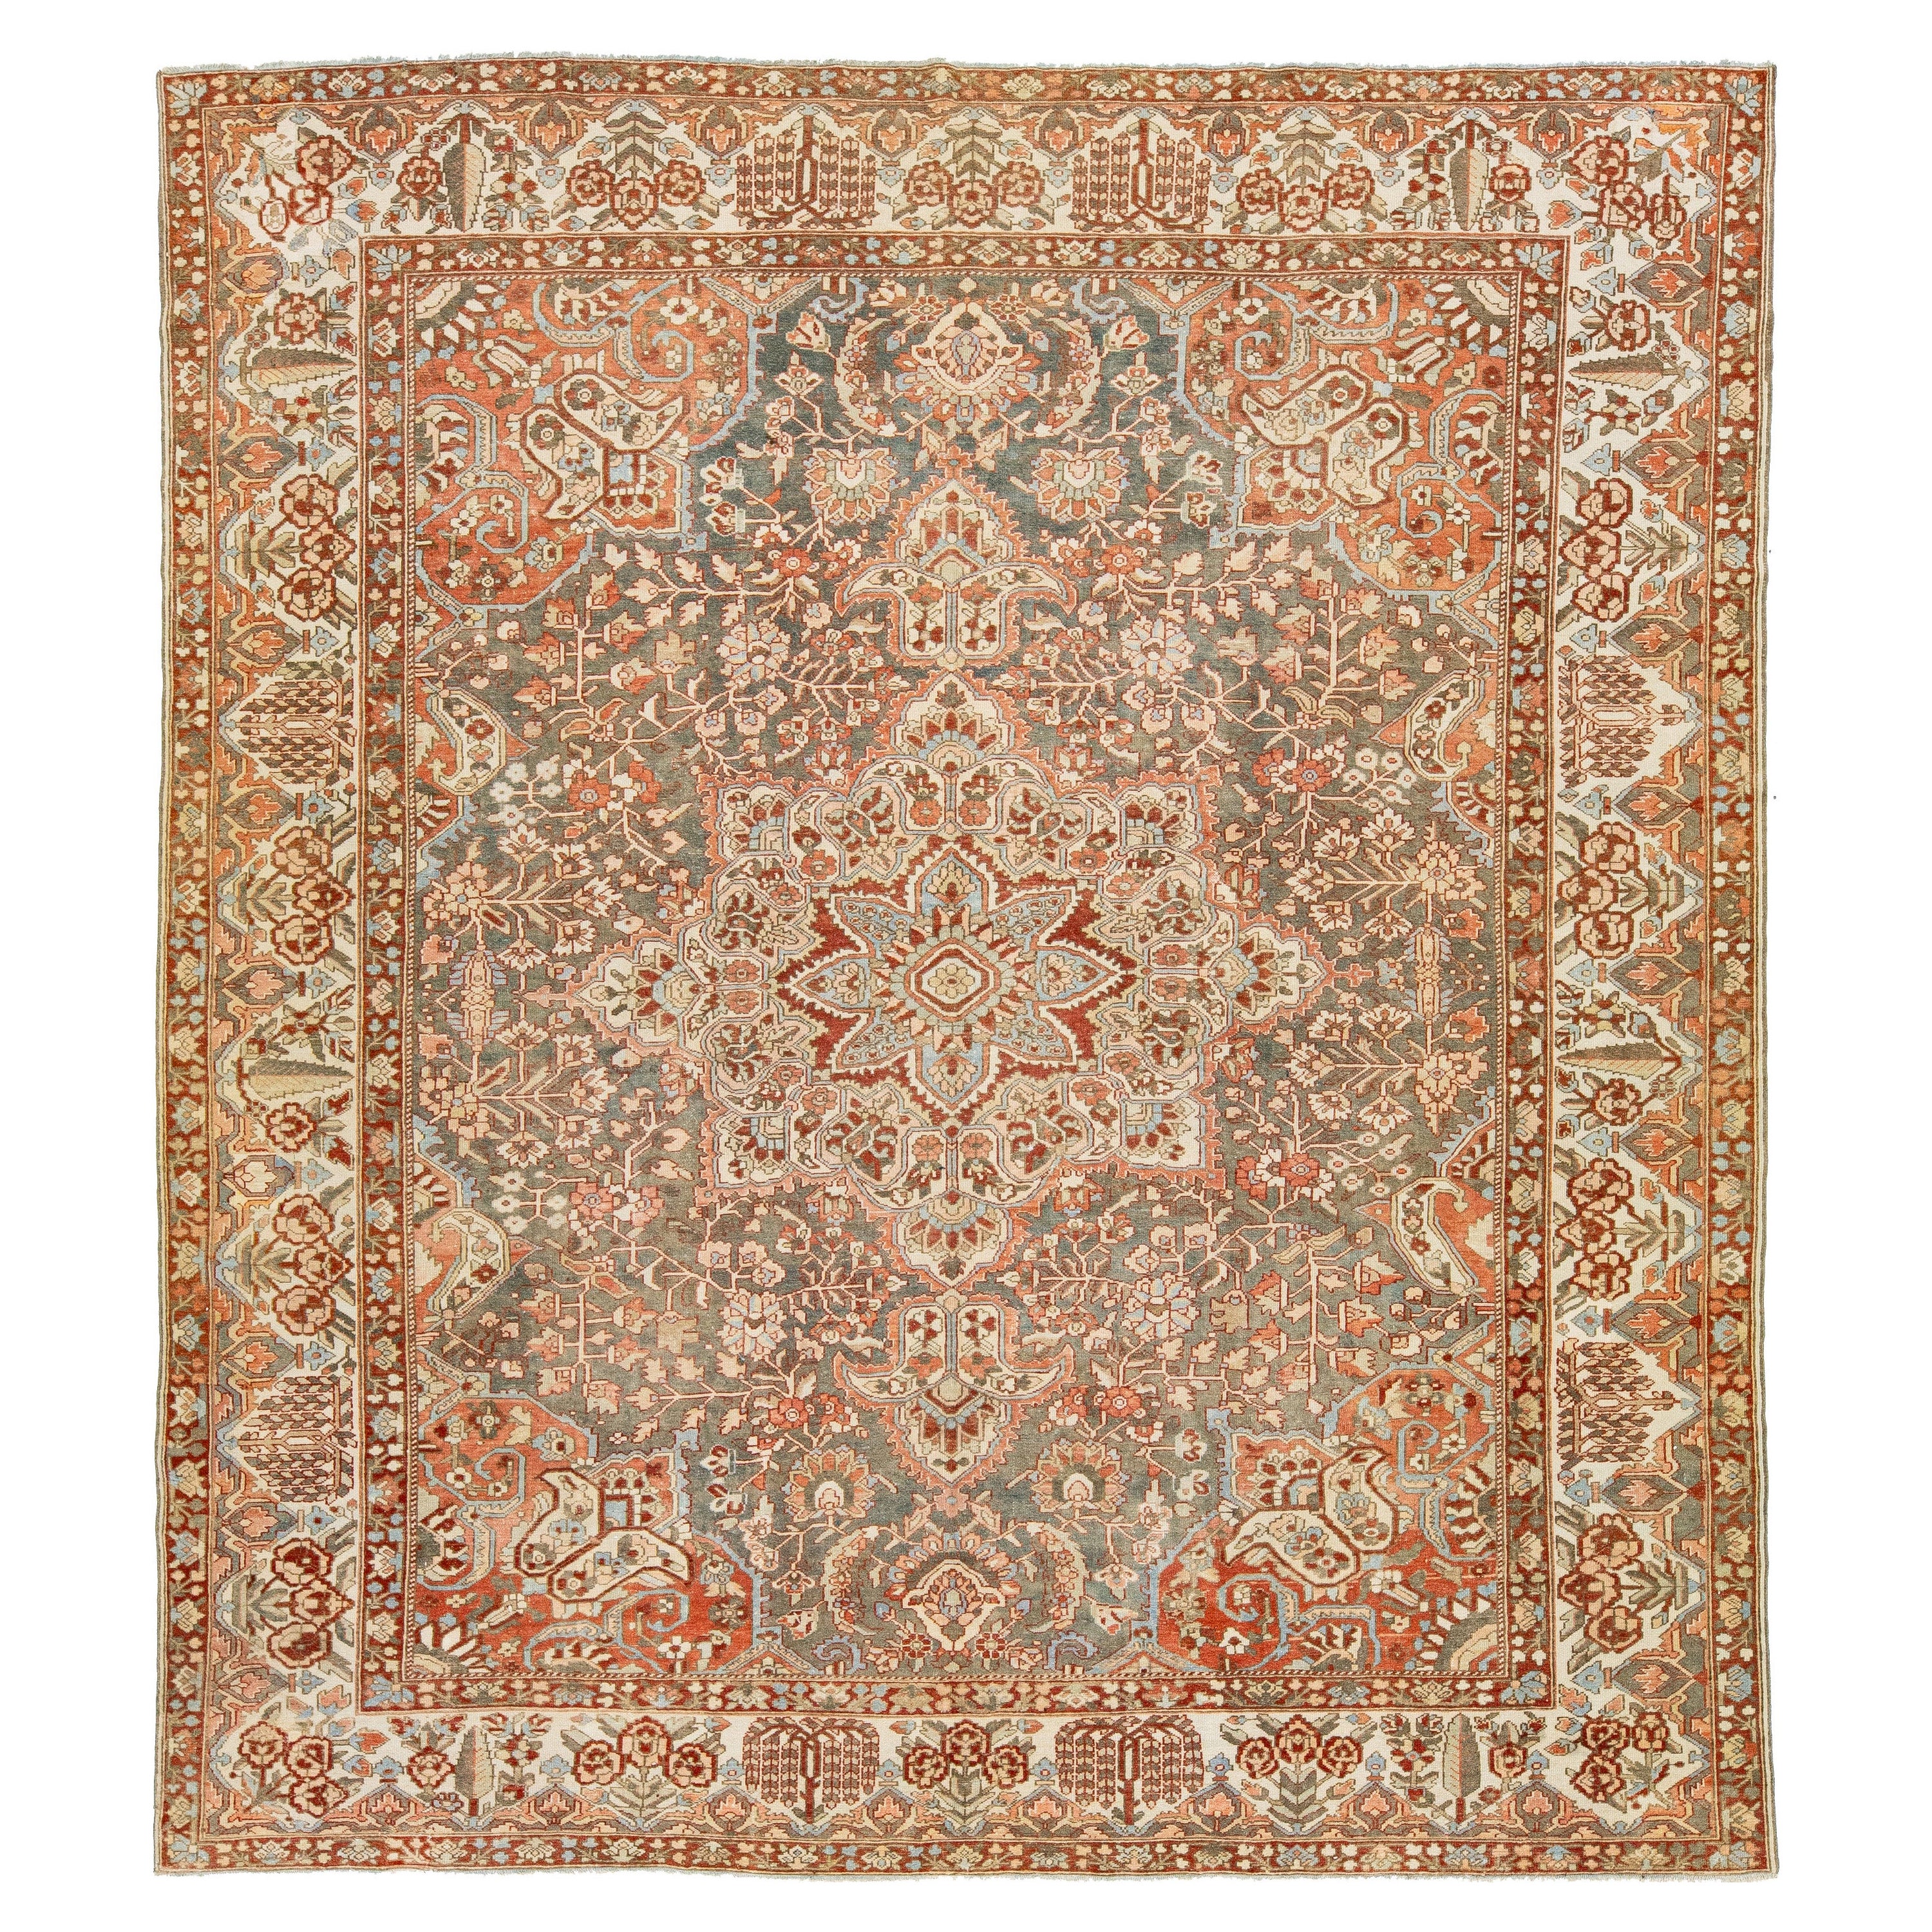 Peach Persian Medallion Bakhtiari Wool Rug was handcrafted in the 1920s For Sale